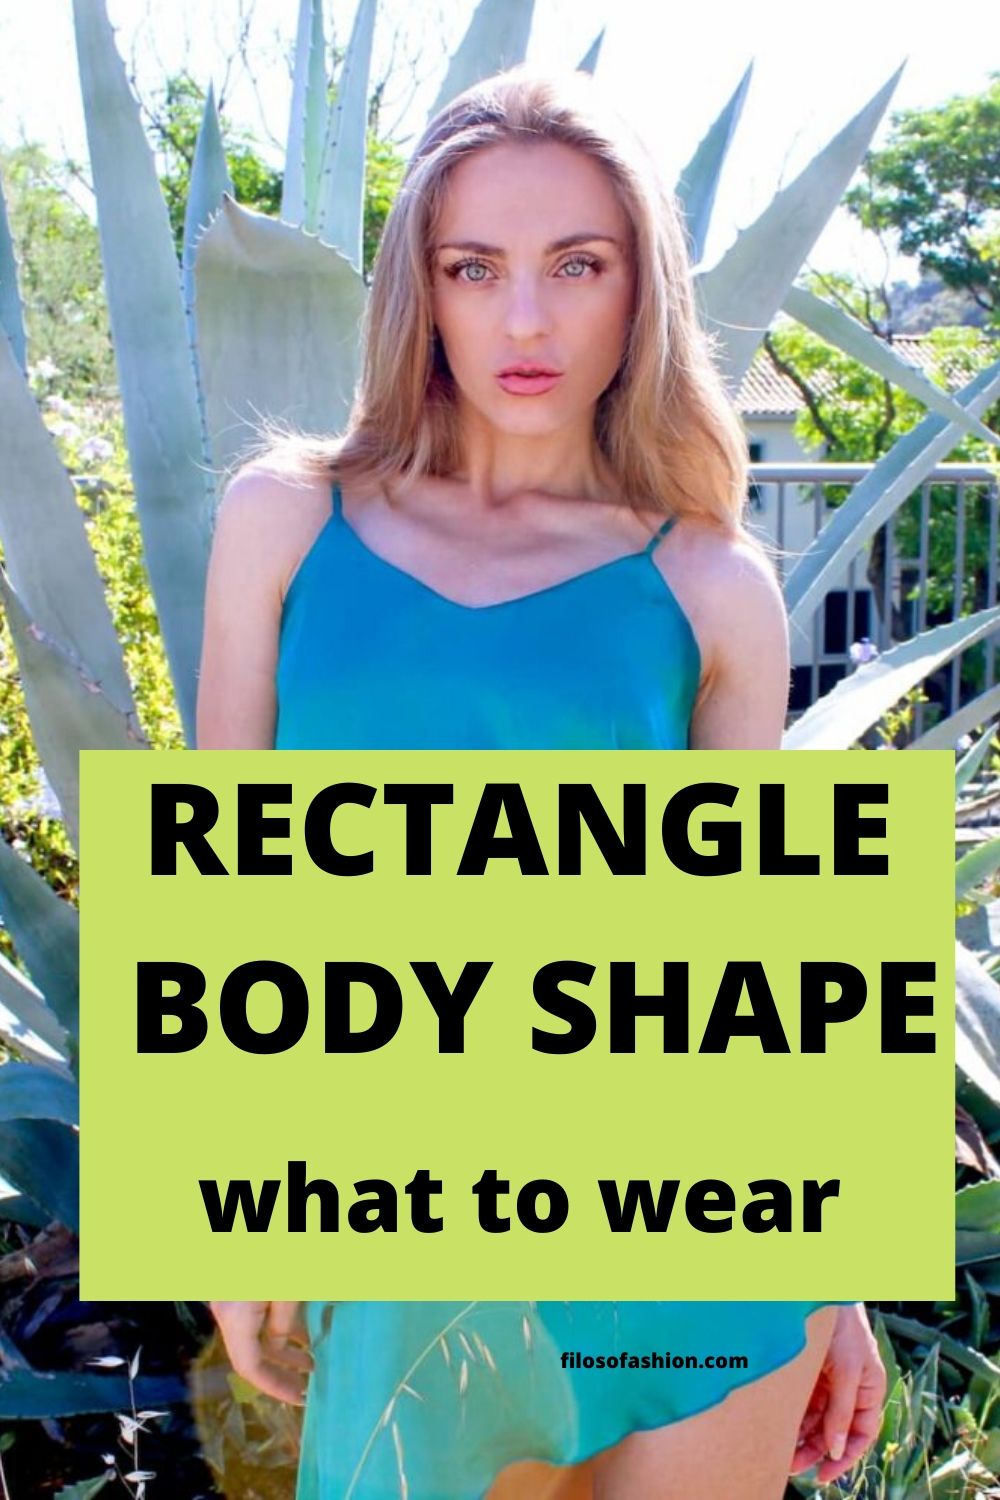 How To Dress For A Rectangle Body Shape: Stylist's Tips